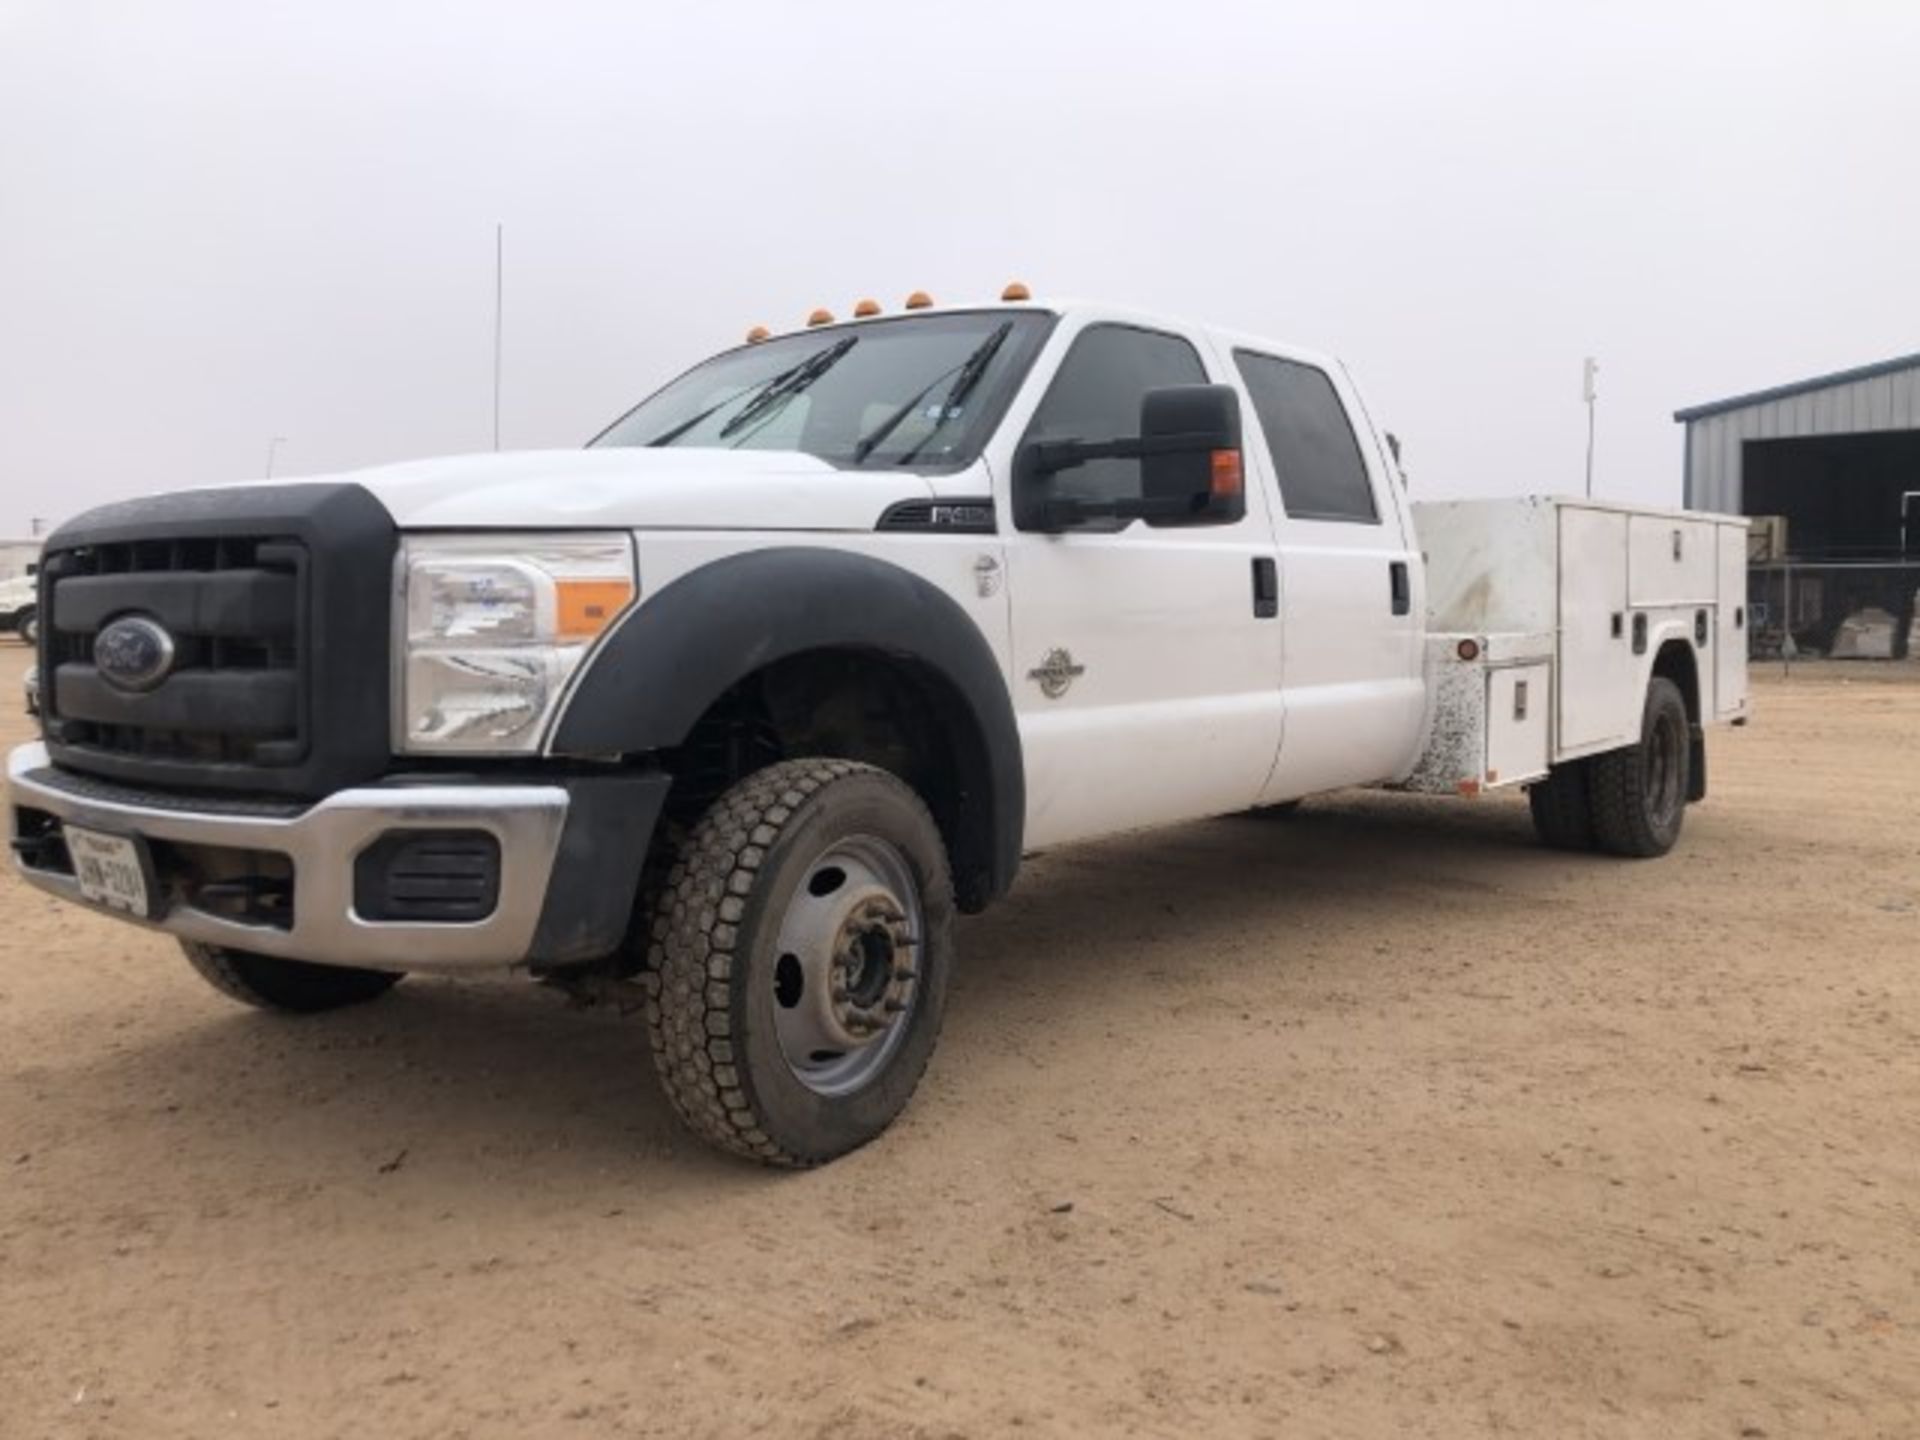 2015 Ford F-450 Service Truck VIN: 1FD0W4HT7FED32562 Odometer States: 14554